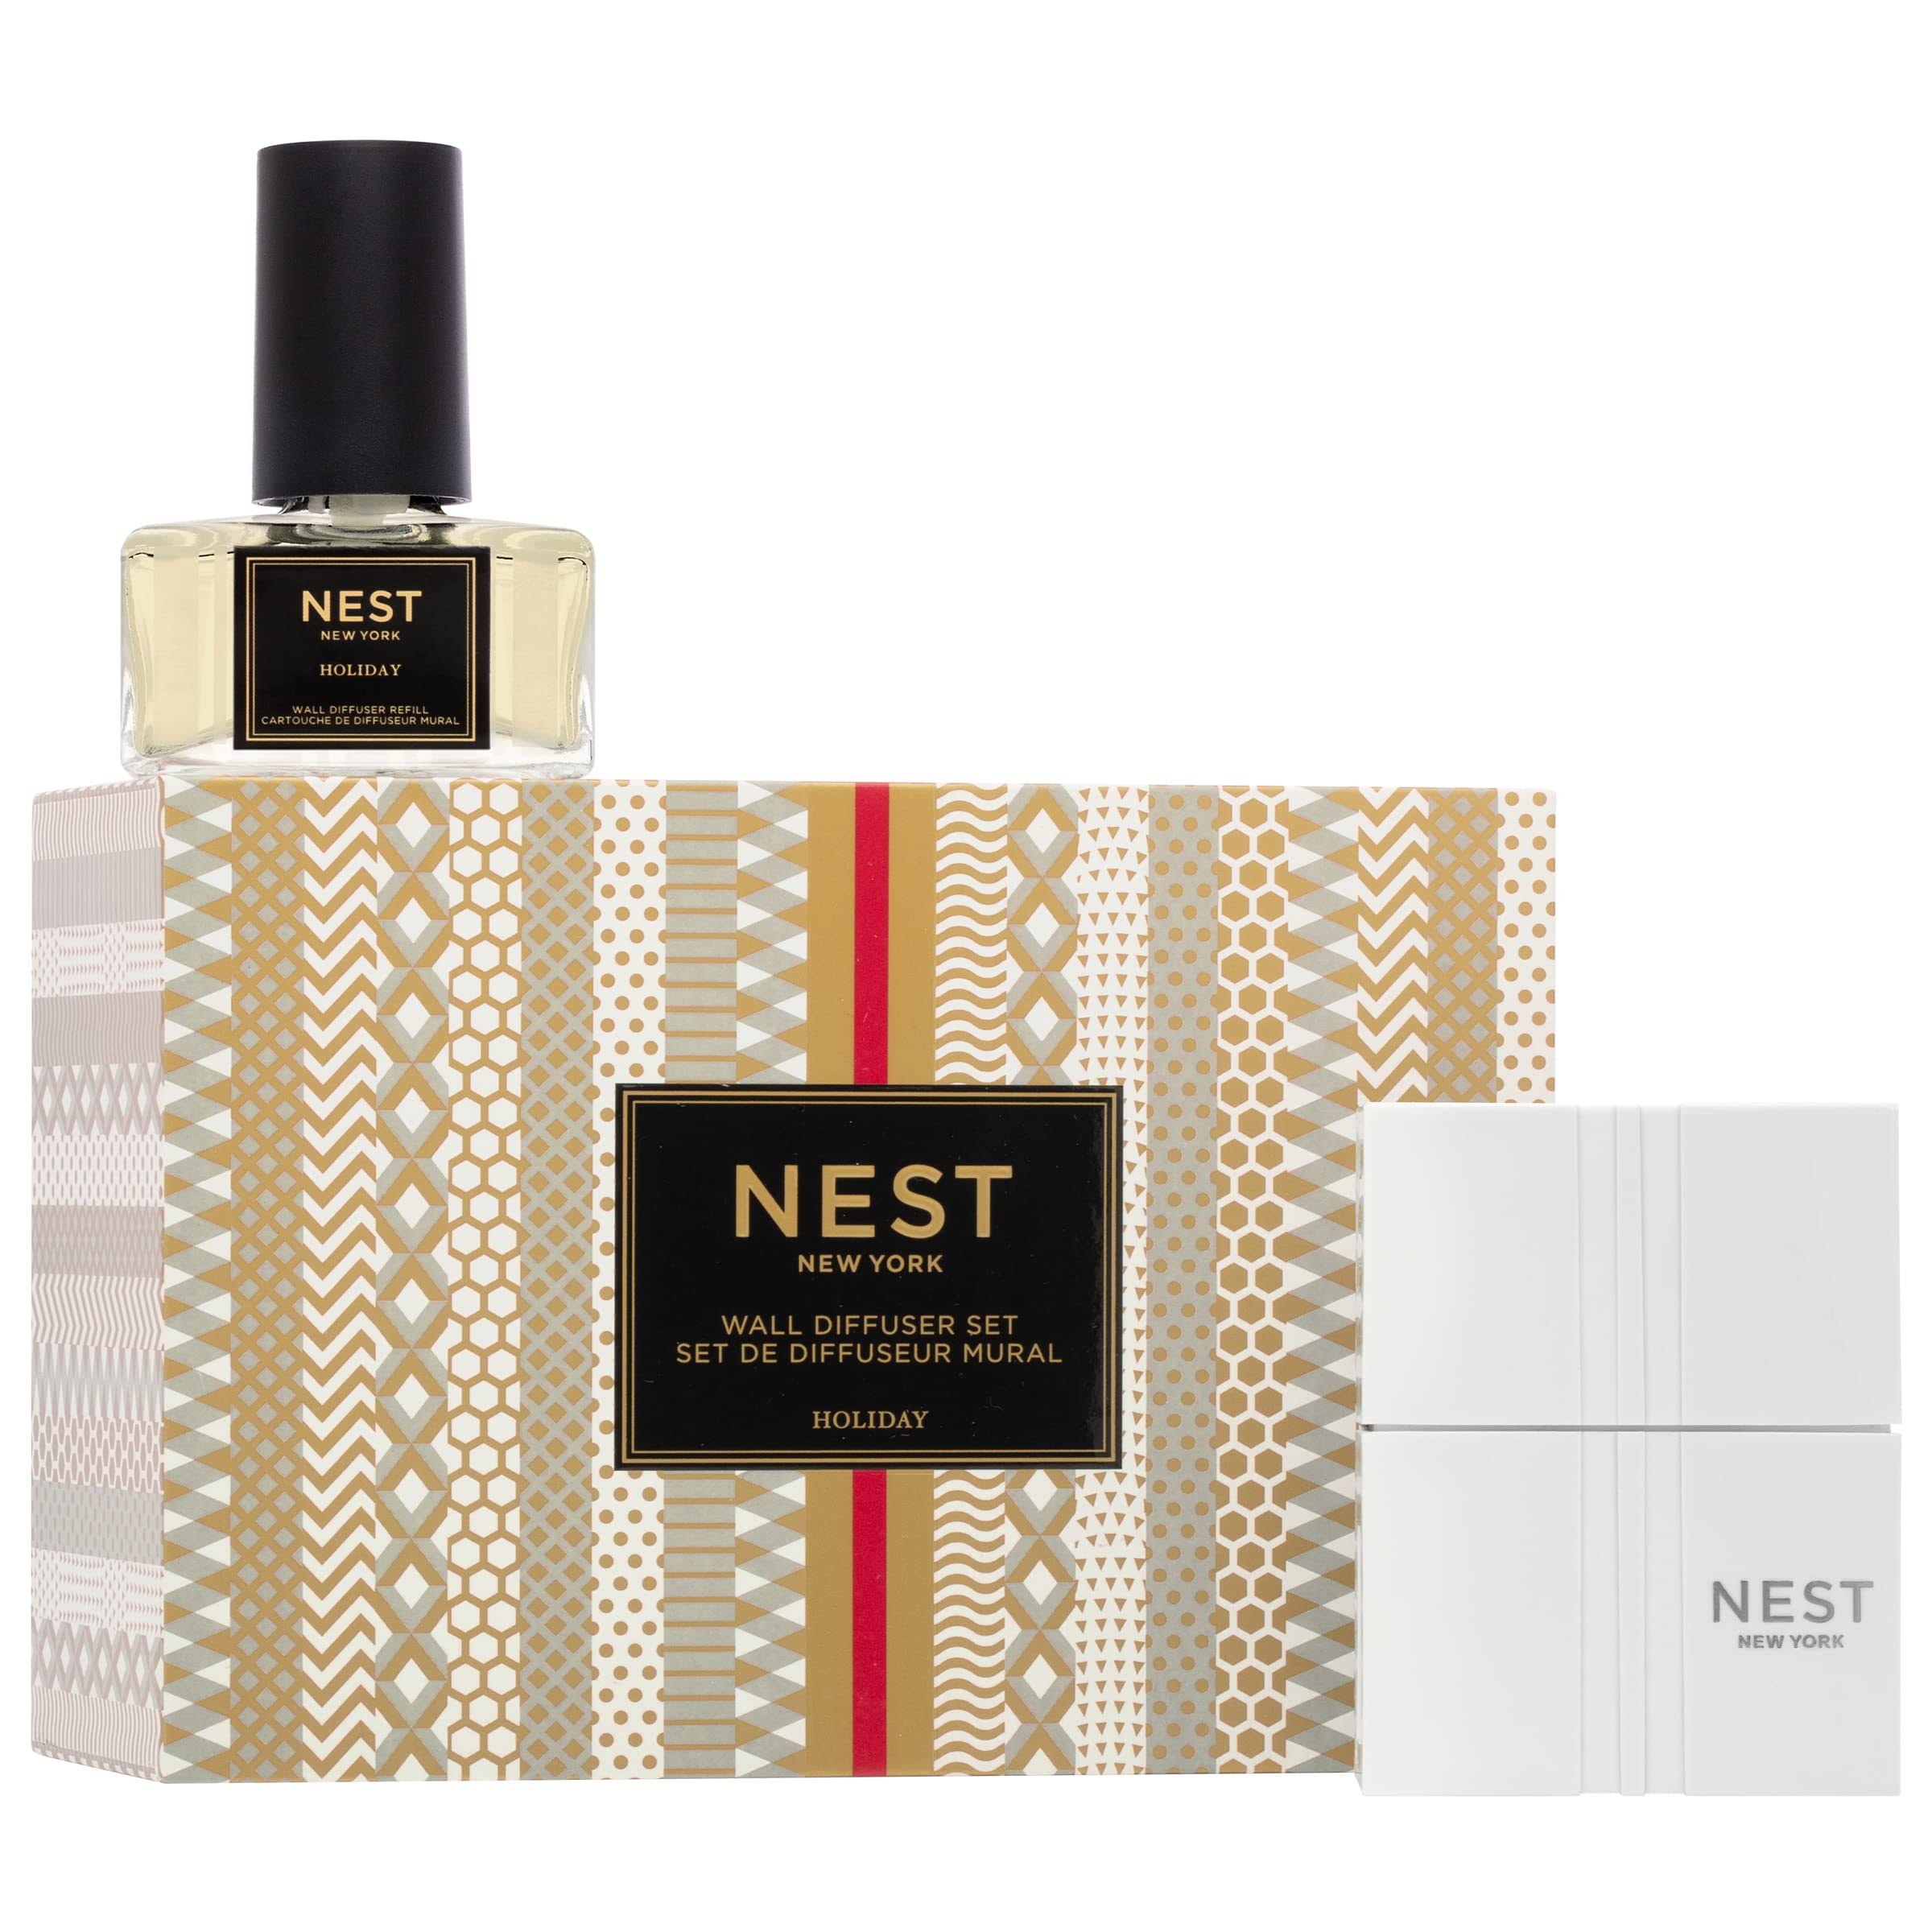 Nest New York Holiday Wall Diffuser Set